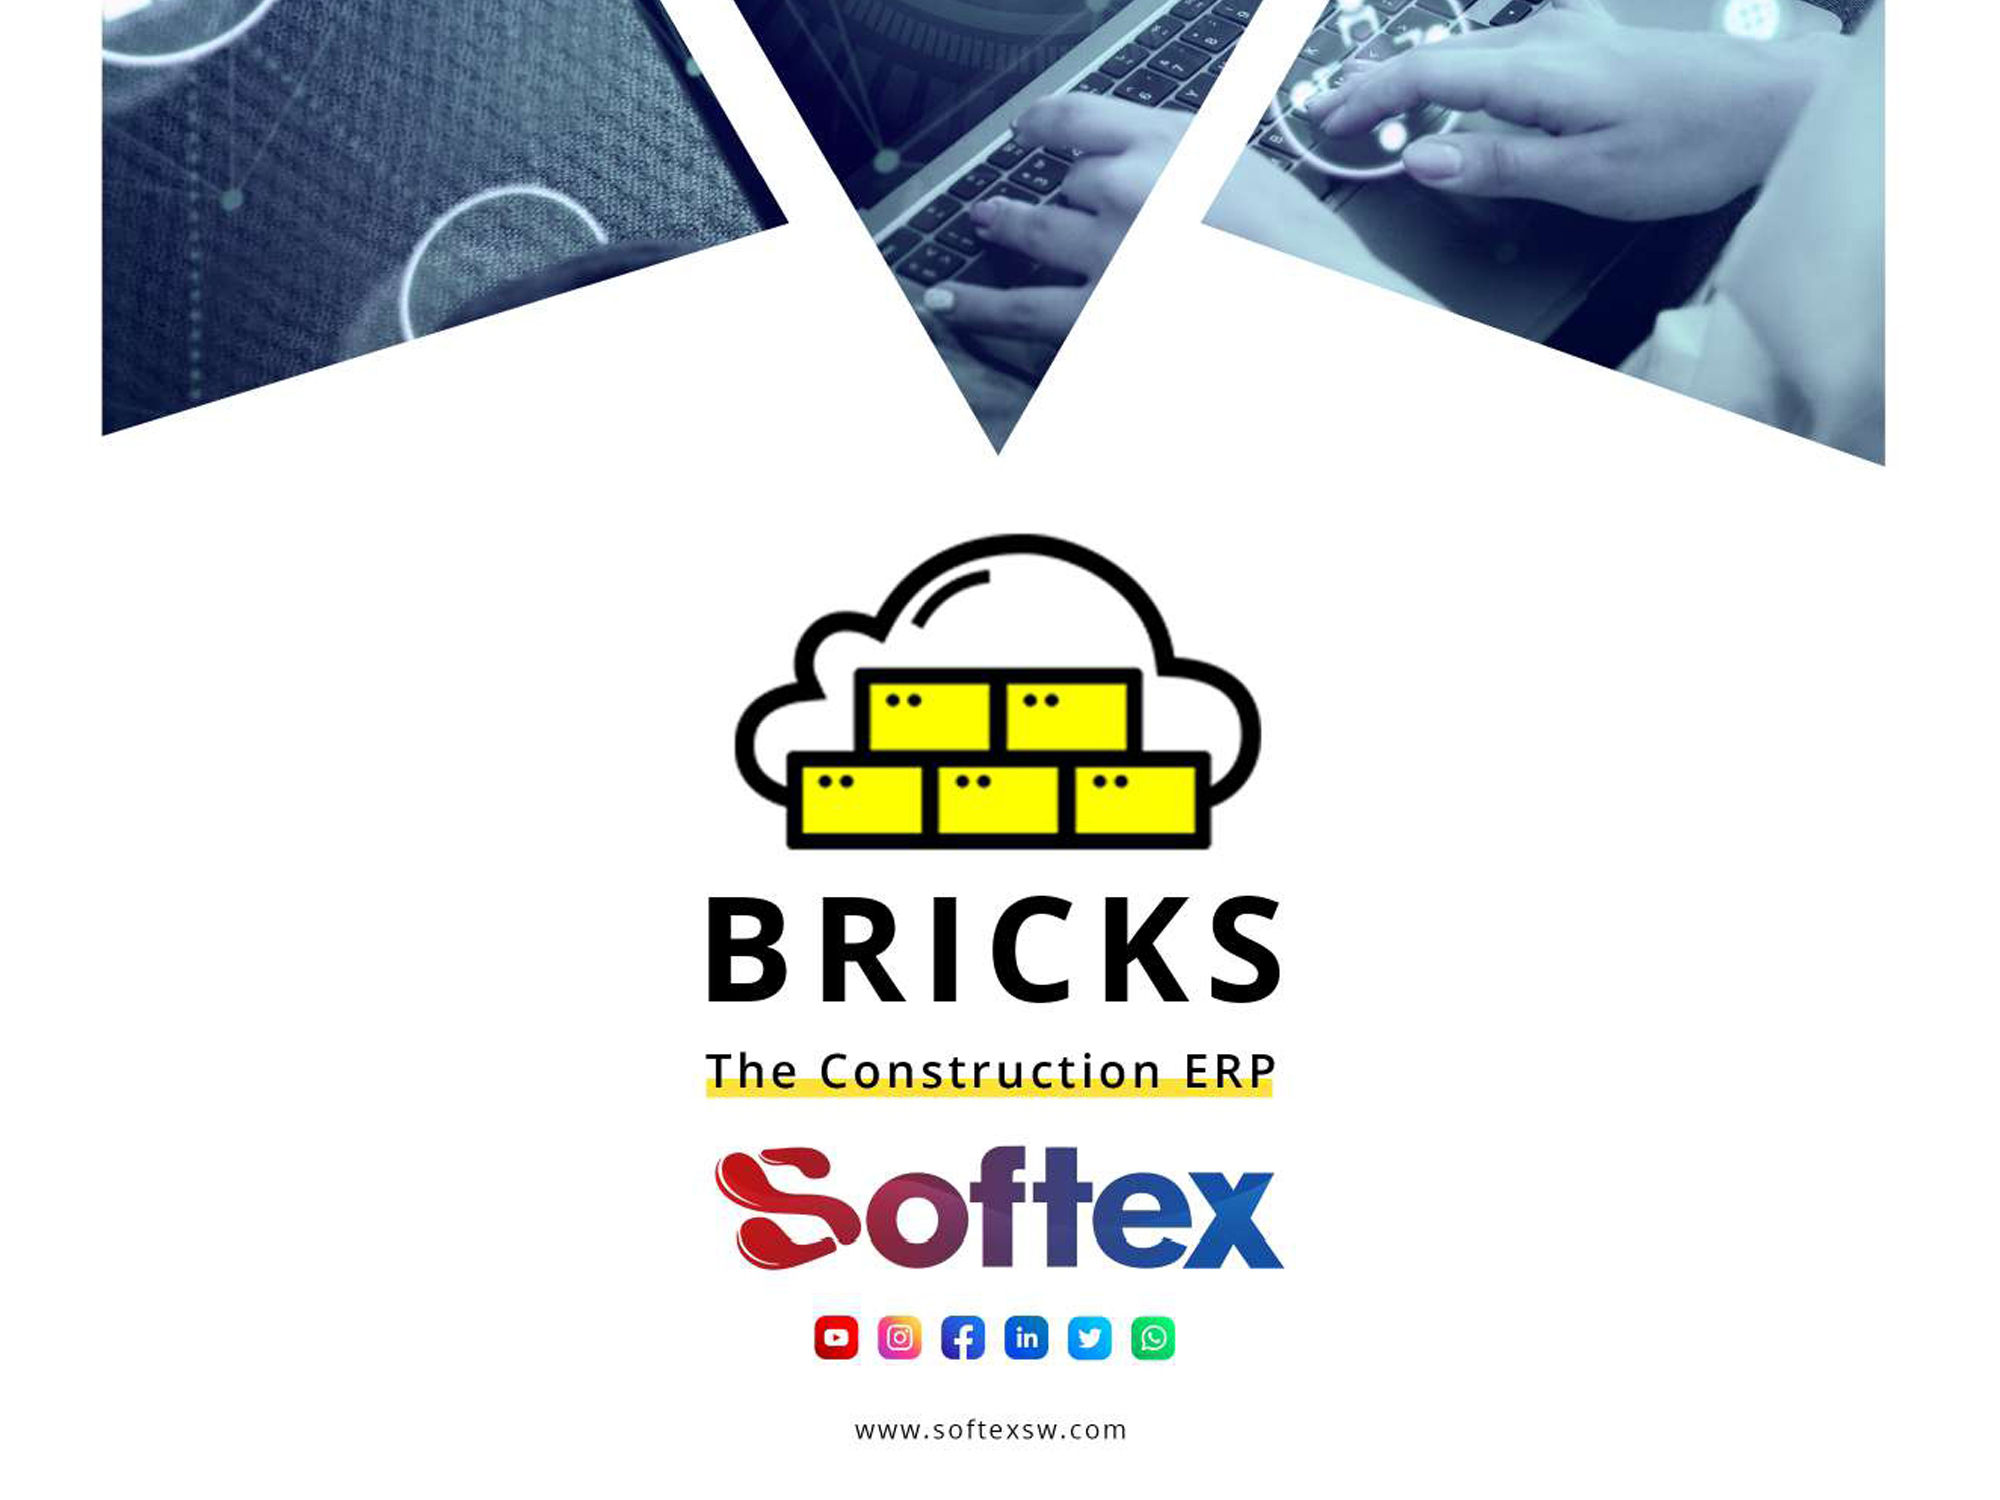 Softex Released BRICKS The Construction ERP